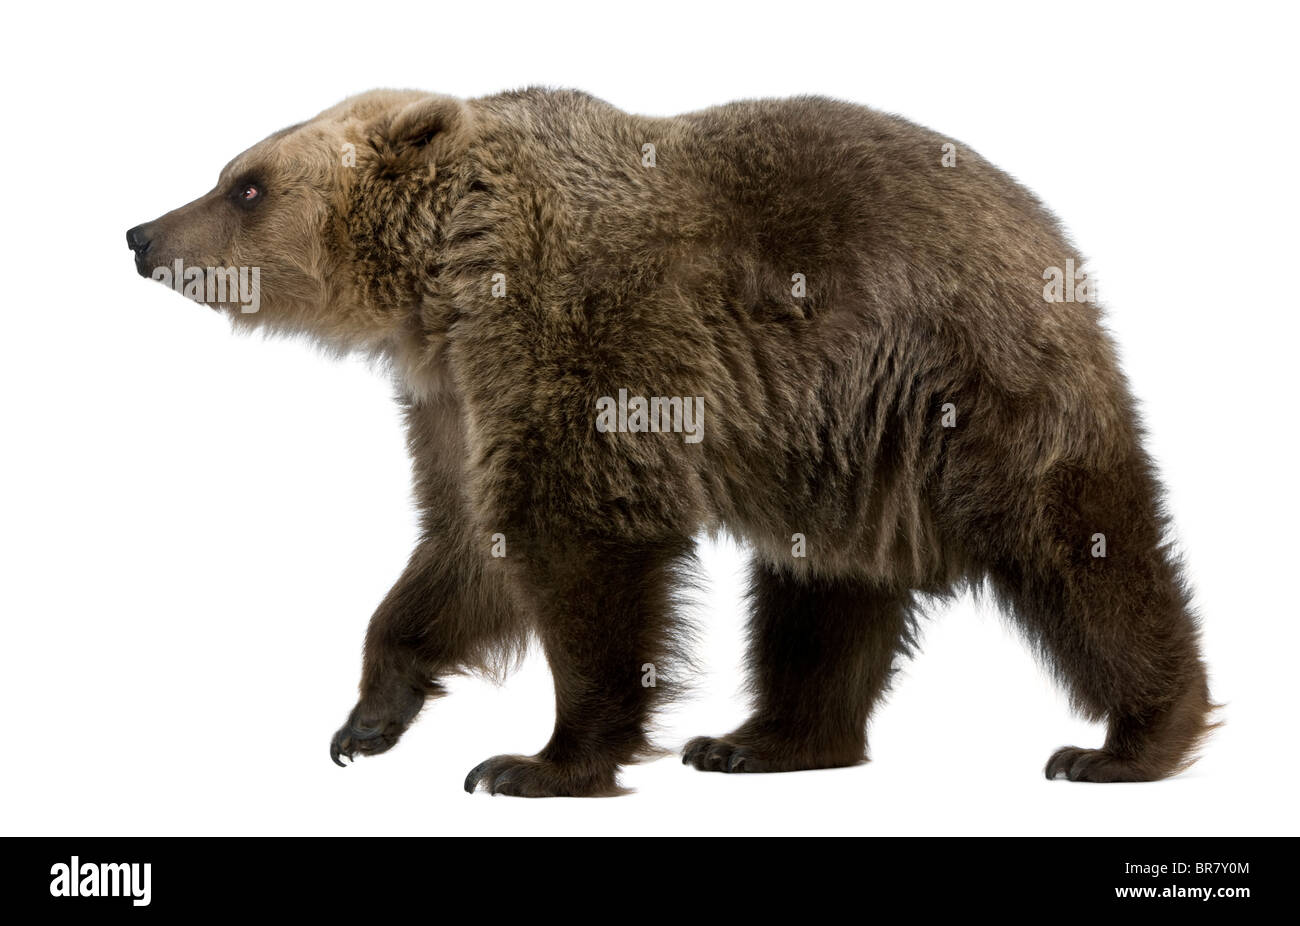 Brown Bear, 8 years old, walking in front of white background Stock Photo